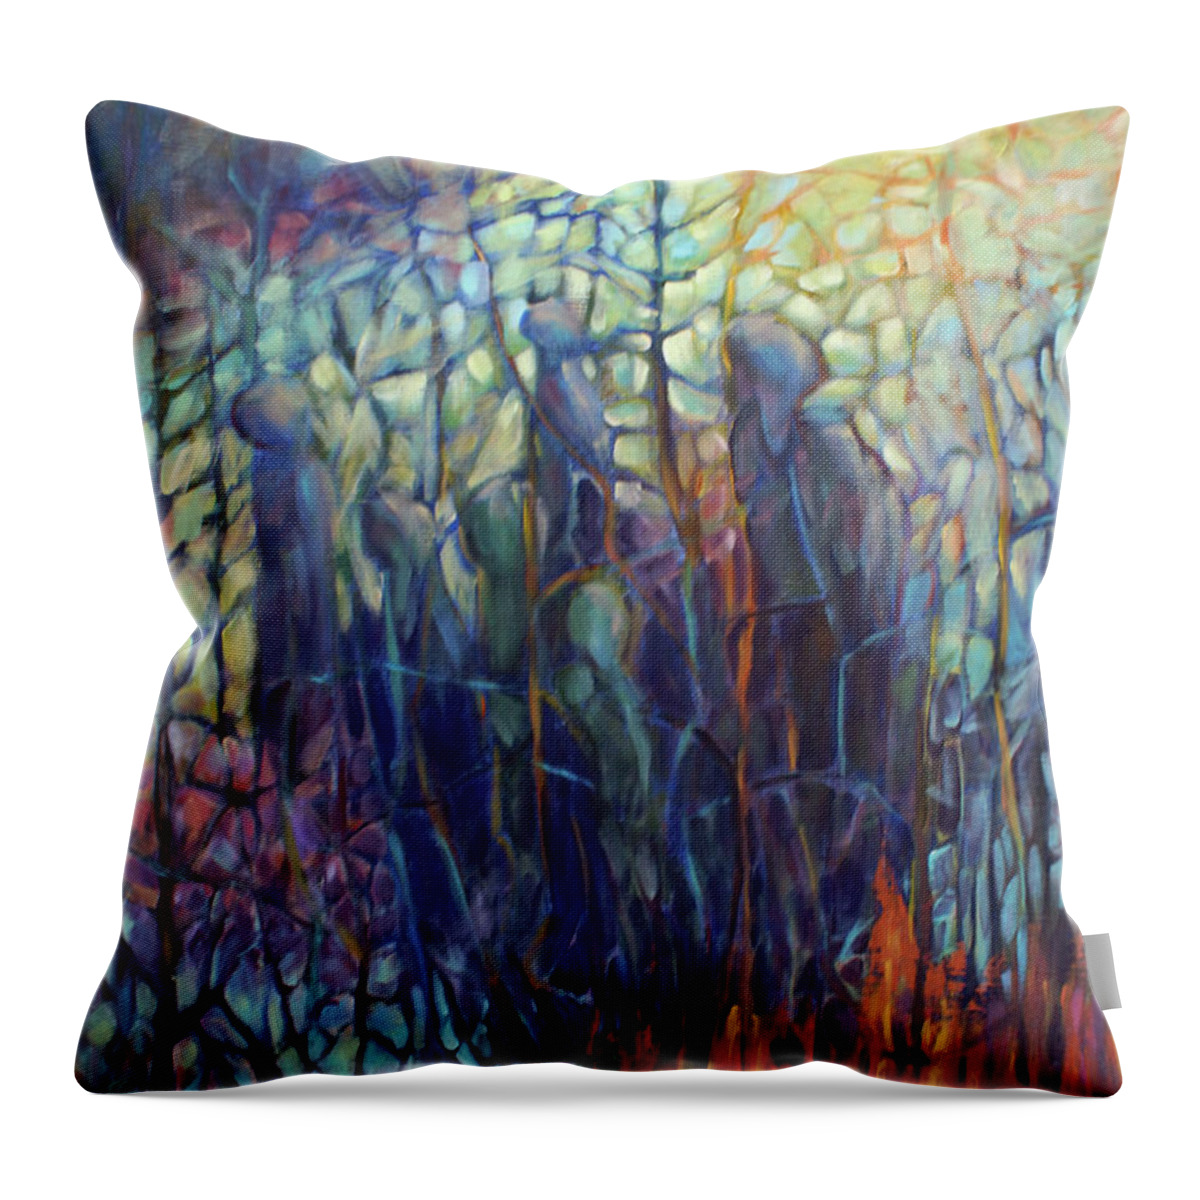 Figures Throw Pillow featuring the painting The Gathering by Jo Smoley